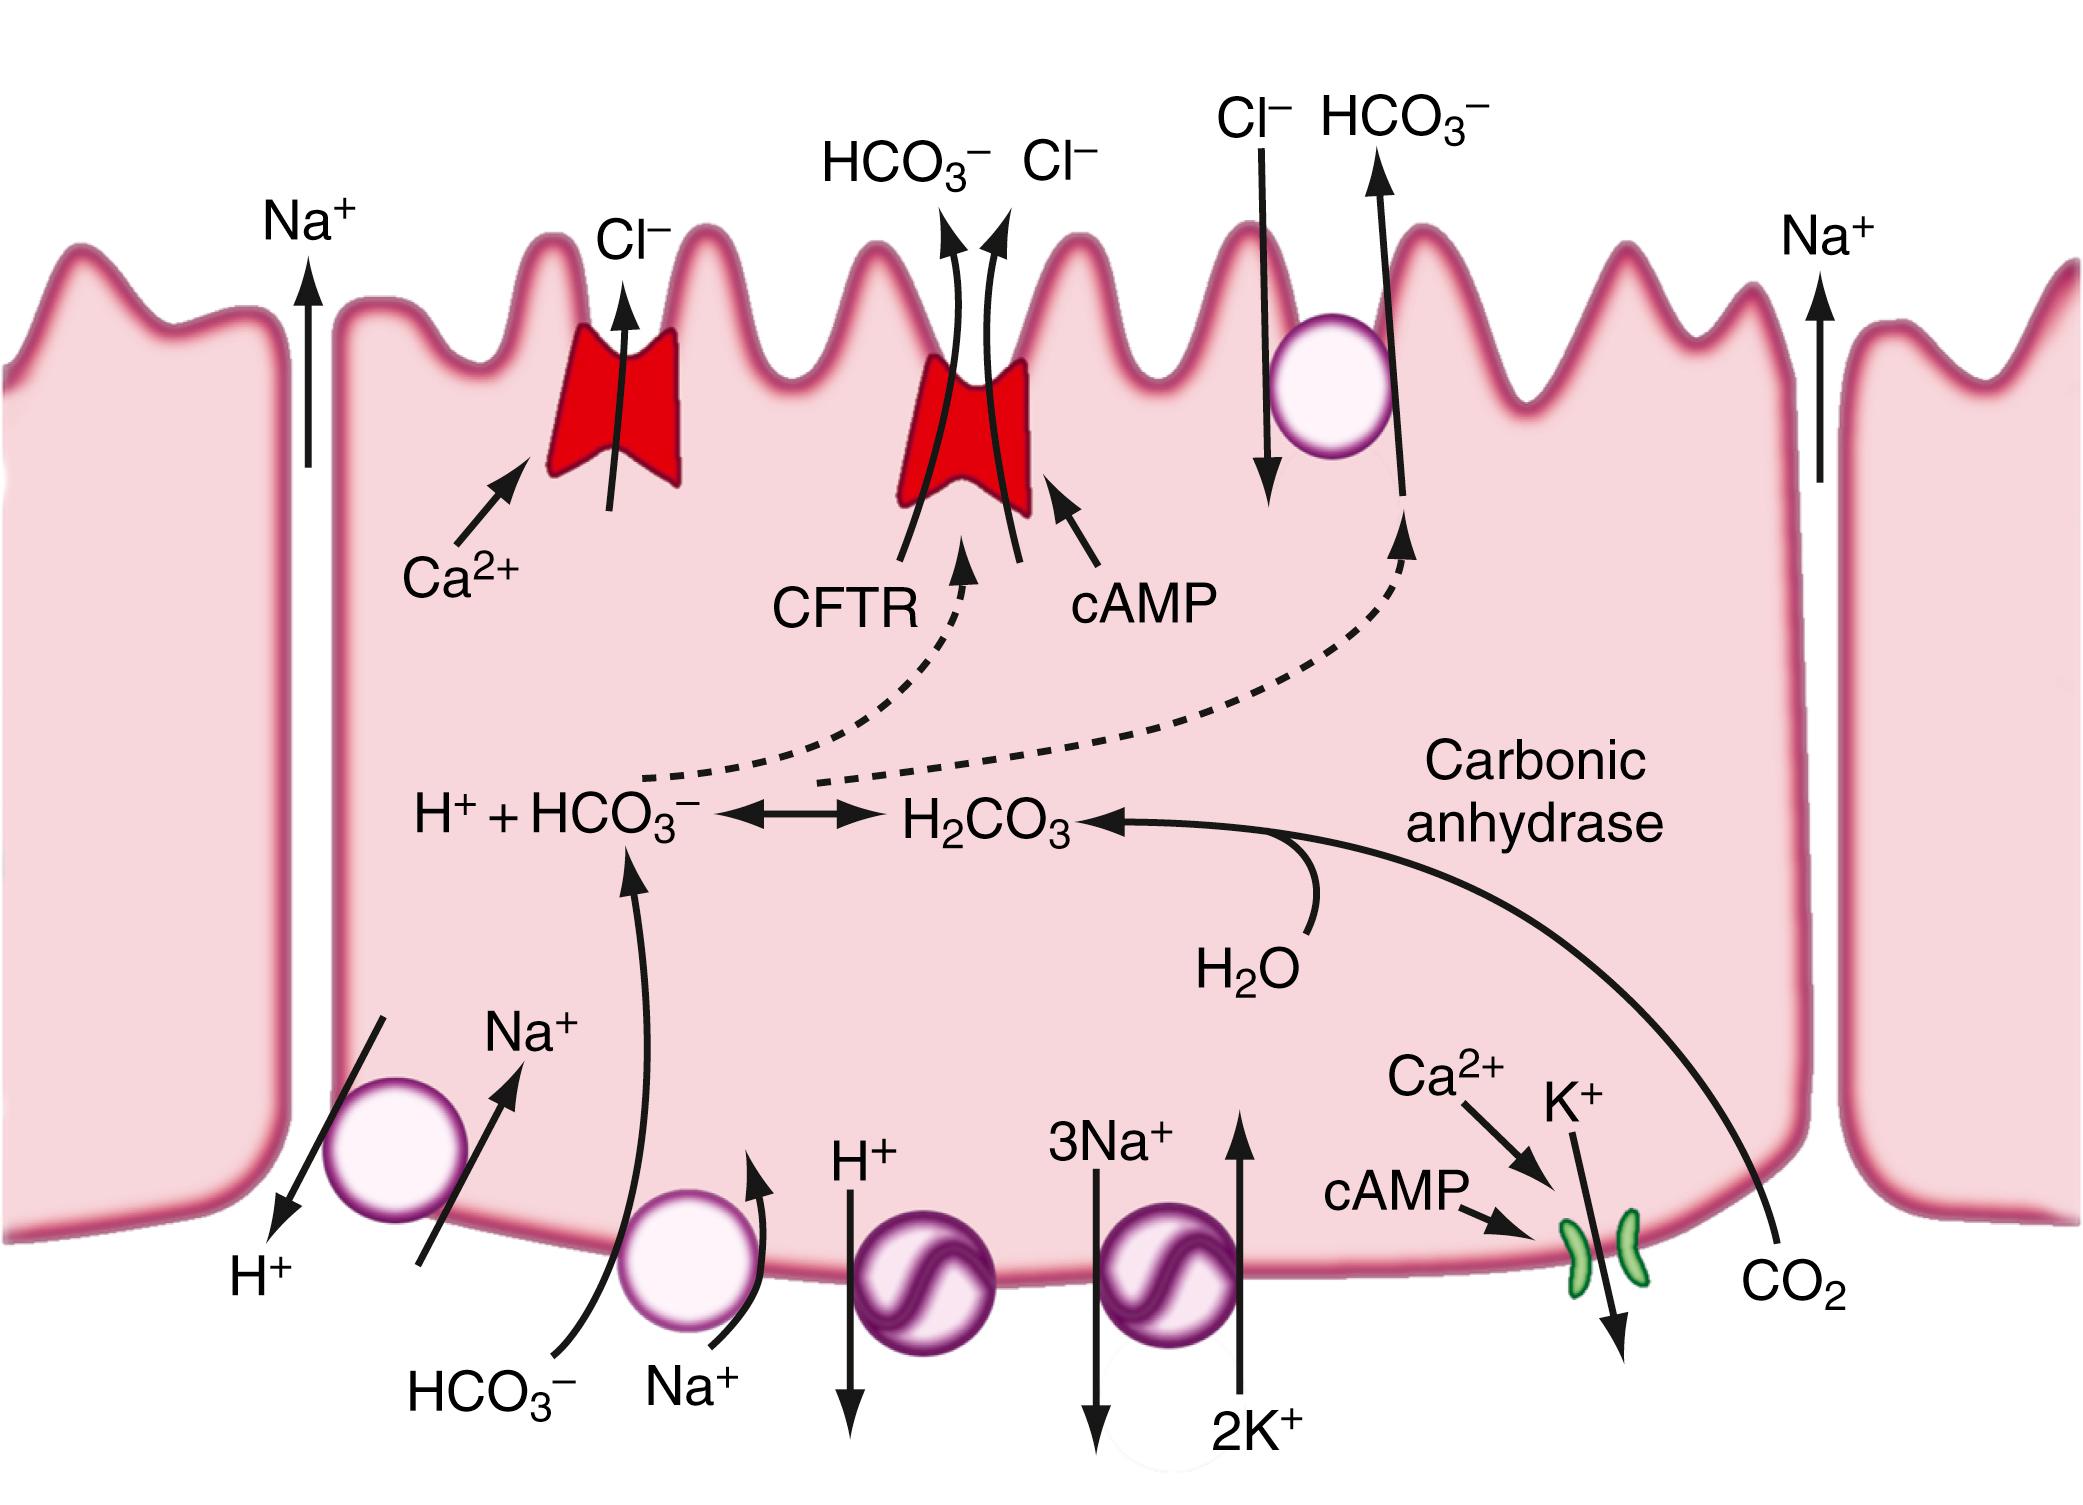 Fig. 56.4, Ion transport by the pancreatic duct cell. HCO 3 − is delivered for ultimate secretion by 2 mechanisms. In one, membrane-diffusible CO 2 is catalytically converted to HCO 3 − and H + by the action of carbonic anhydrase, which hydrates CO 2 , thereby forming H 2 CO 3 , which then dissociates to HCO 3 − and H + . The duct cell is rich in carbonic anhydrase. In the other Na + , and HCO 3 − are cotransported on the basolateral membrane. The HCO 3 − is then available for apical secretion by both the cystic fibrosis transmembrane conductance regulator ( CFTR ) and Cl − -HCO 3 − anion exchange. Na + and H 2 O are delivered to the lumen through intercellular junctions. H + is removed from the cell by a basolateral Na + , H + antiport and a H + -ATPase to maintain a constant intracellular pH. Secretion is activated by increased permeability of apical Cl − and HCO 3 − channels and basolateral K + channels through agonists (i.e., secretin and acetylcholine) that increase cellular cyclic AMP (cAMP) levels (secretin) and calcium levels (acetylcholine).